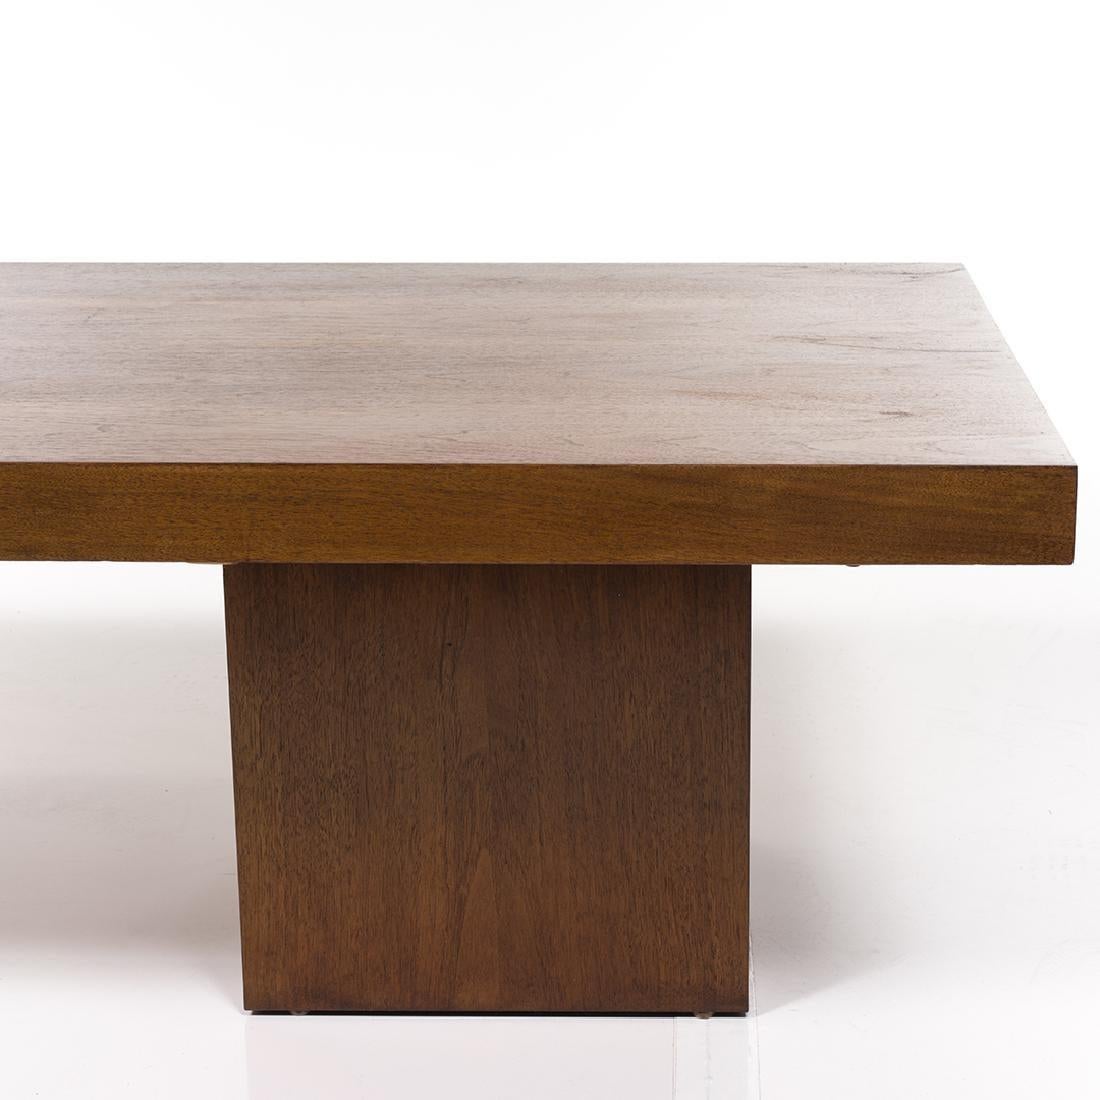 Mid-Century Modern expanding coffee table designed by John Keal for Brown Saltman in the United States, circa 1960s. This walnut wood coffee table extends up to 96” revealing a dark grey laminate surface in the center. The expandable top sits upon